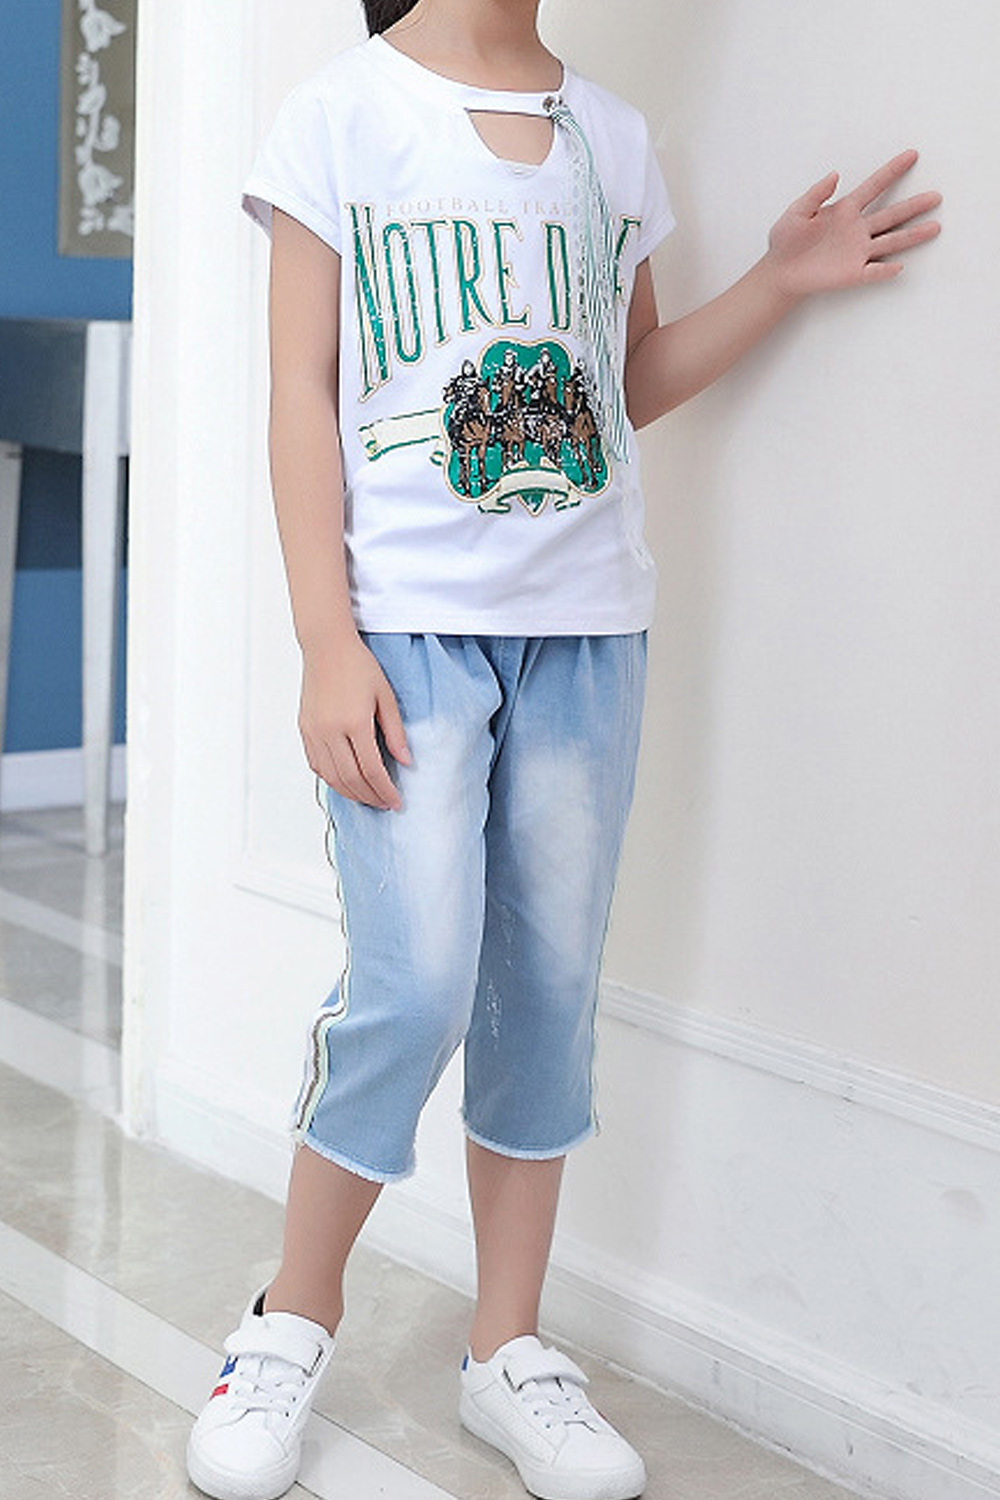 Unomatch Kids Girls Fashionable Printed Pattern Short Sleeve Summer Casual Outfit Set